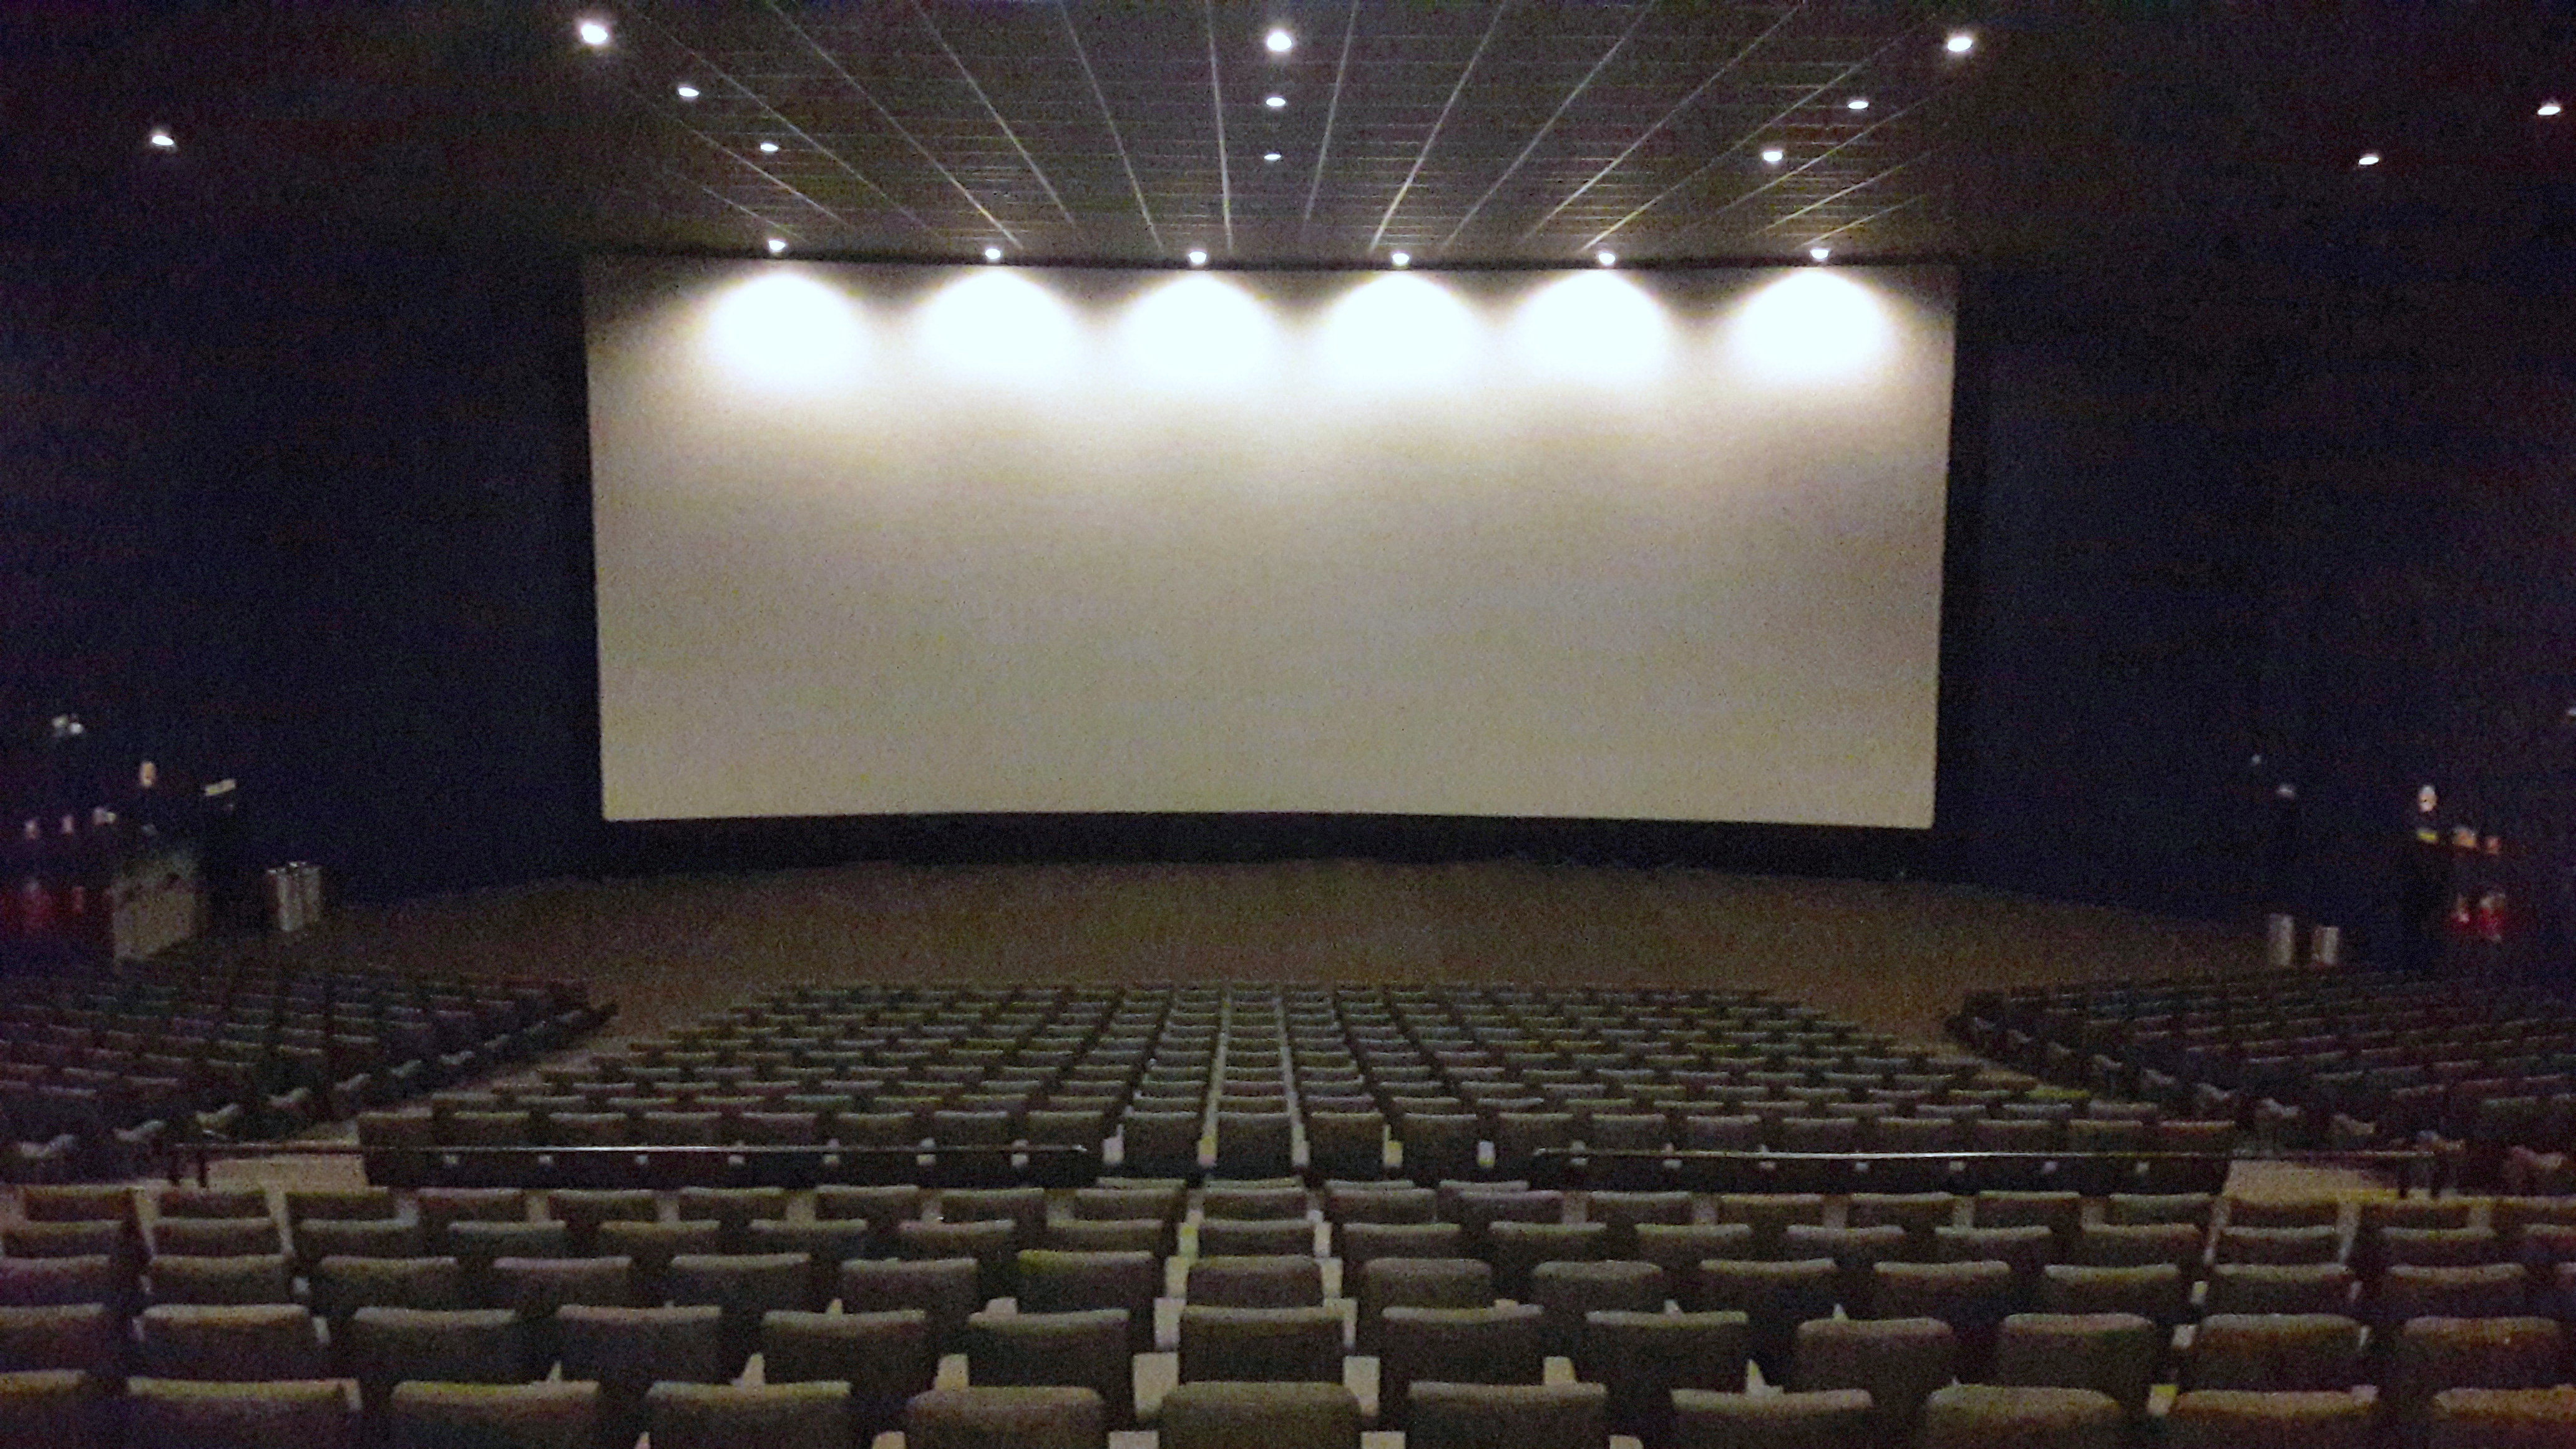 A person standing alone in an empty theater.